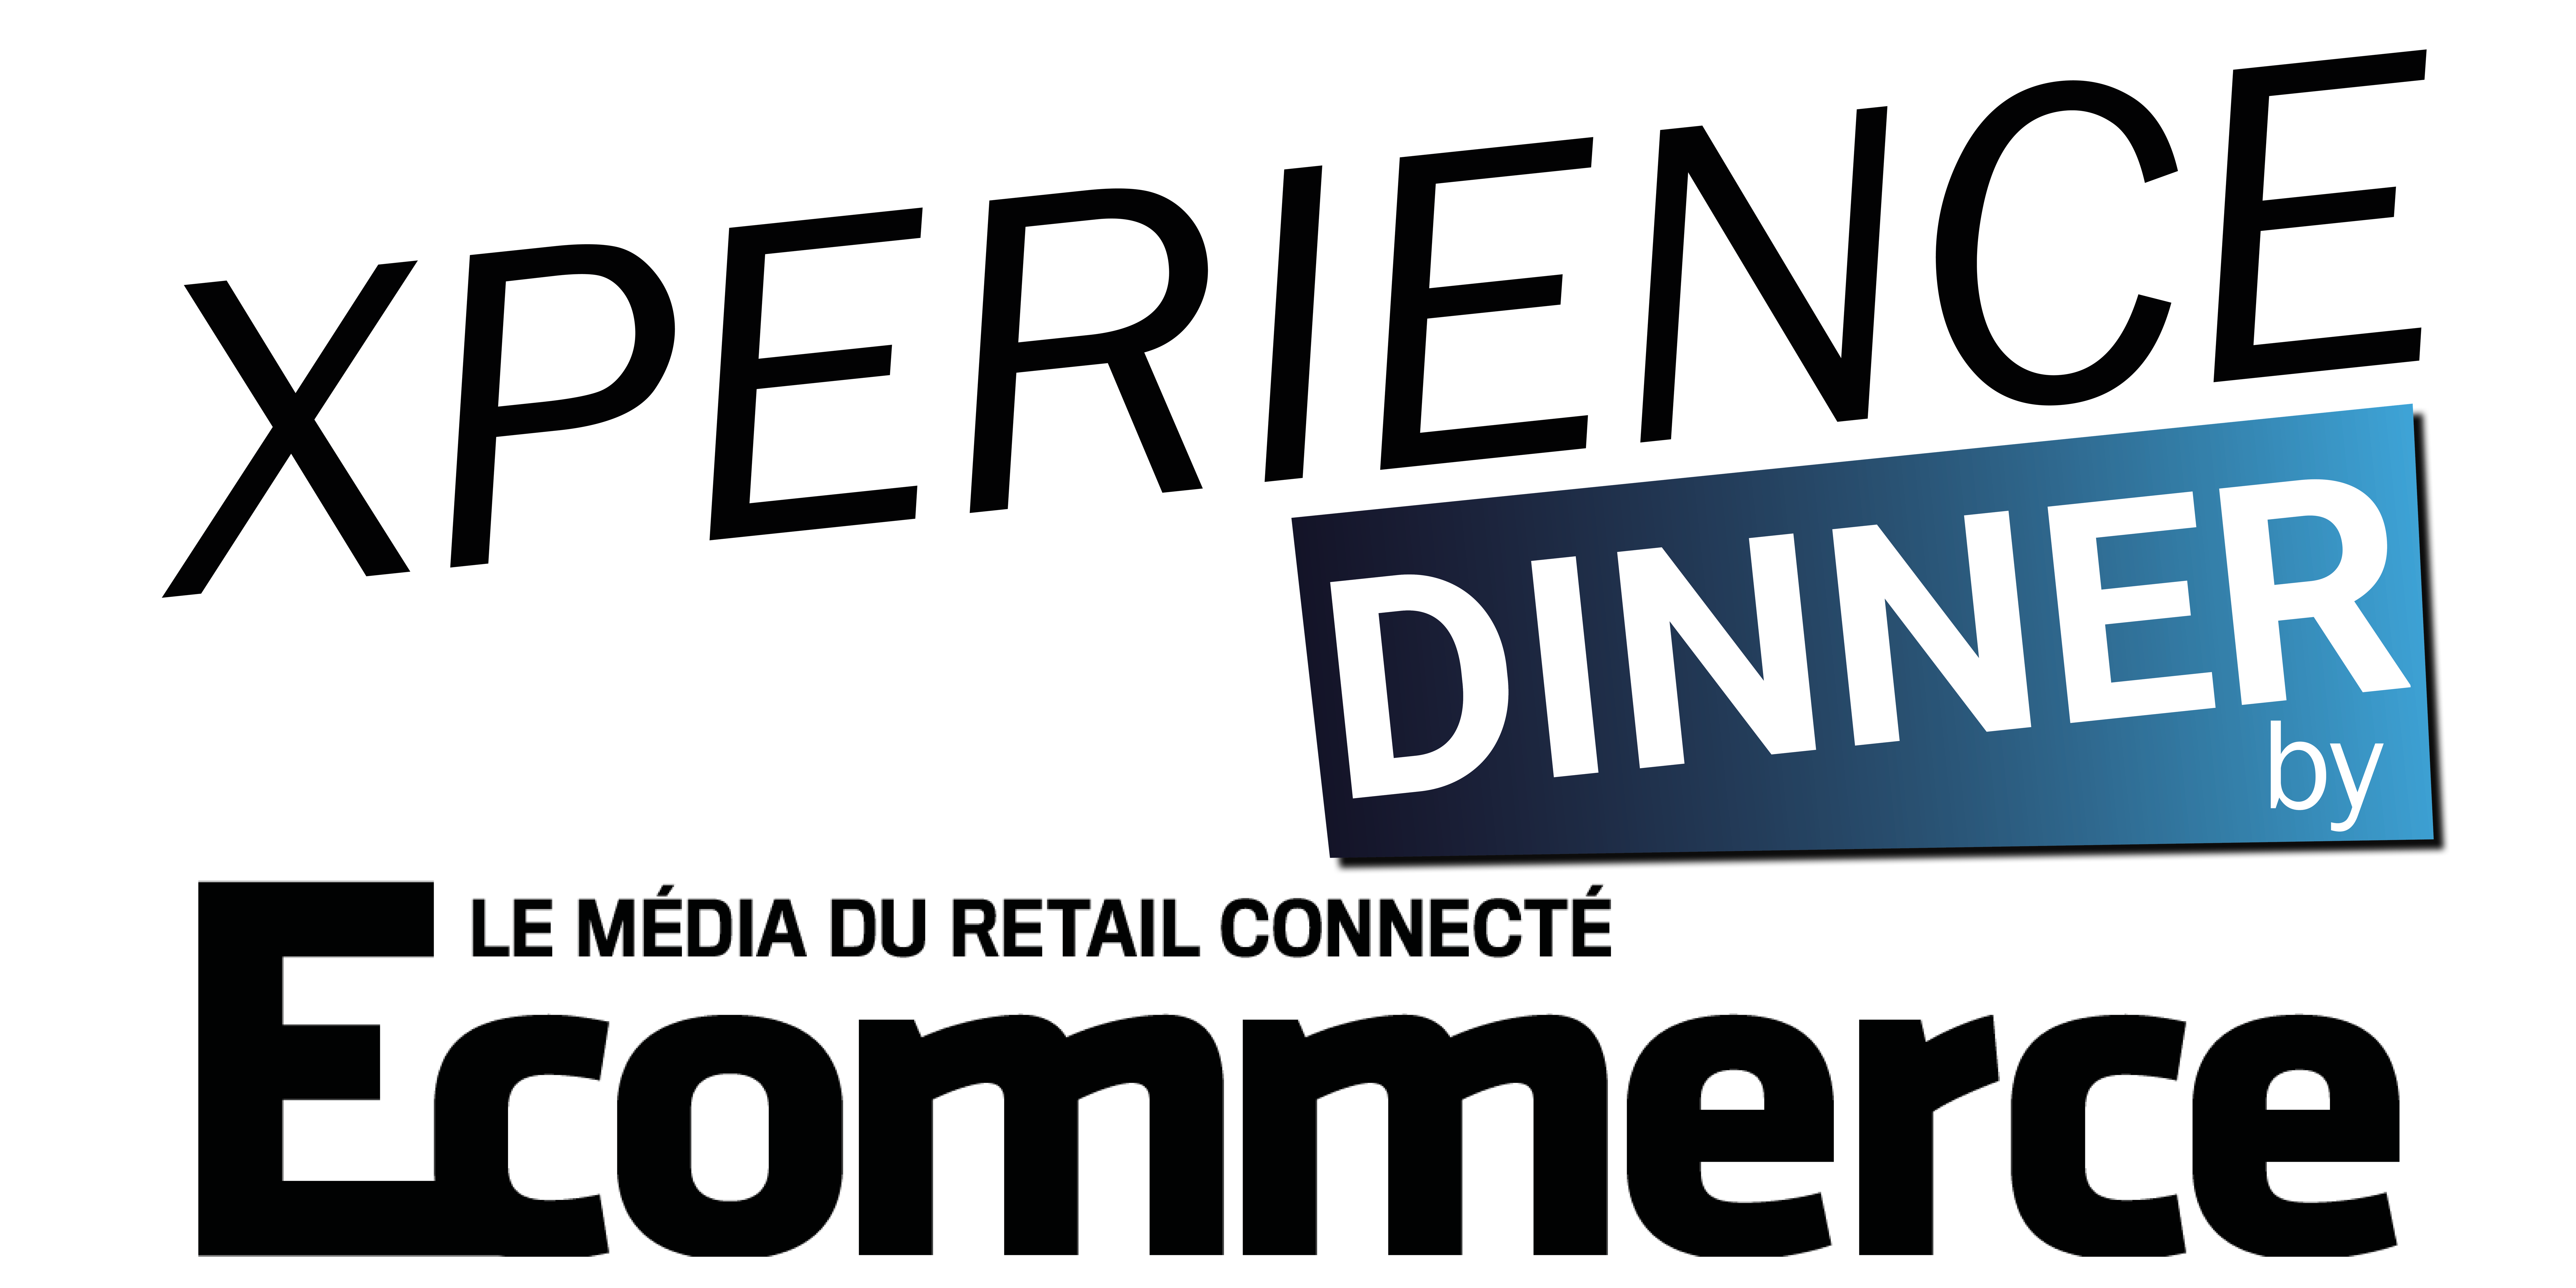 Xperience Dinner by Ecommerce